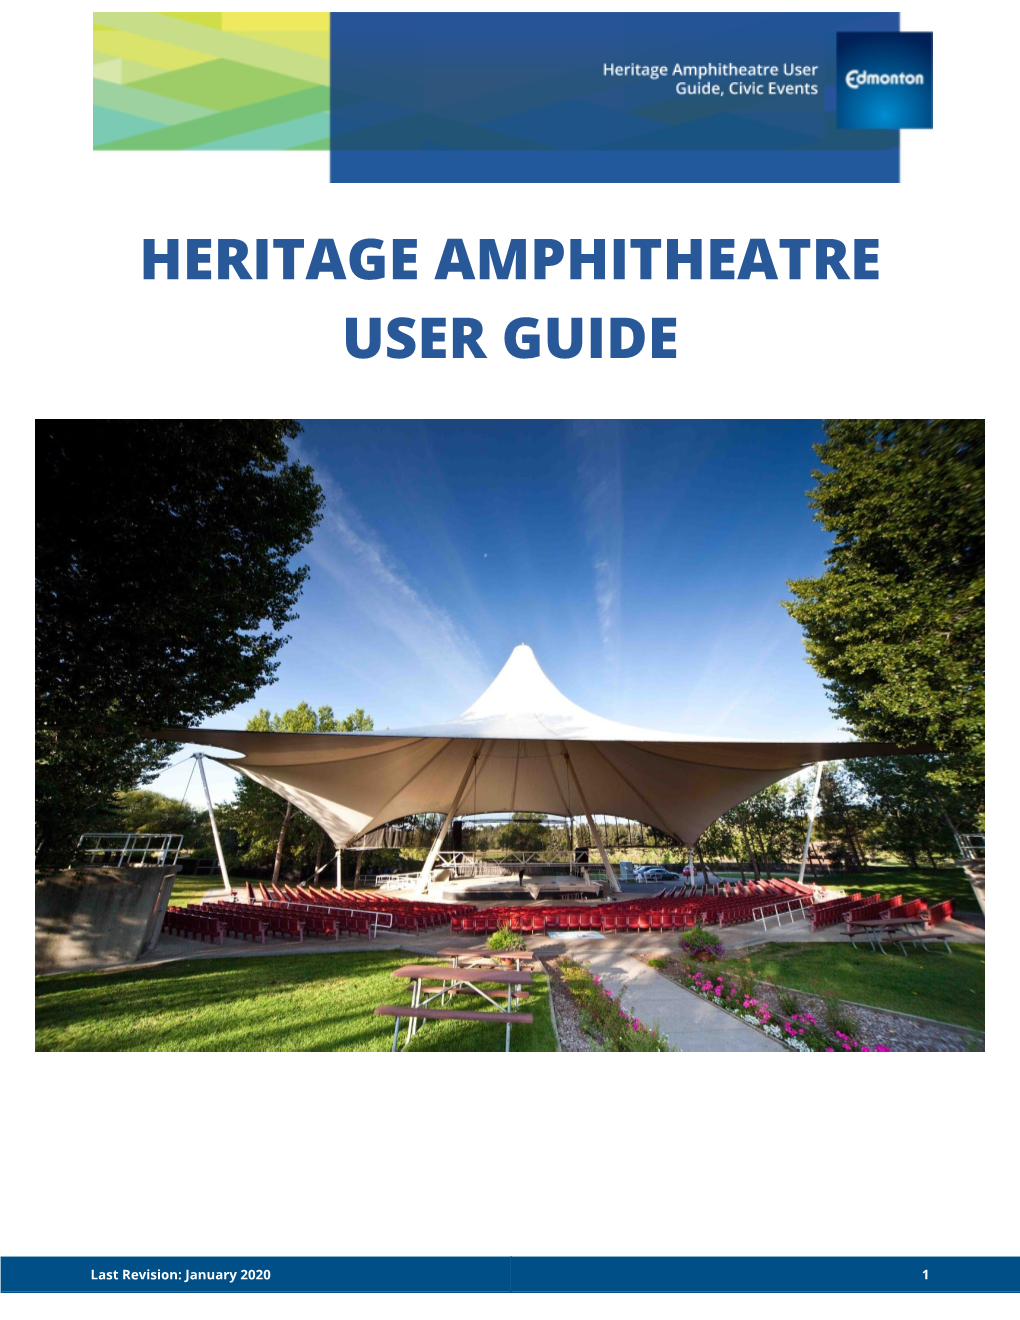 Download Heritage Amphitheatre User Guide